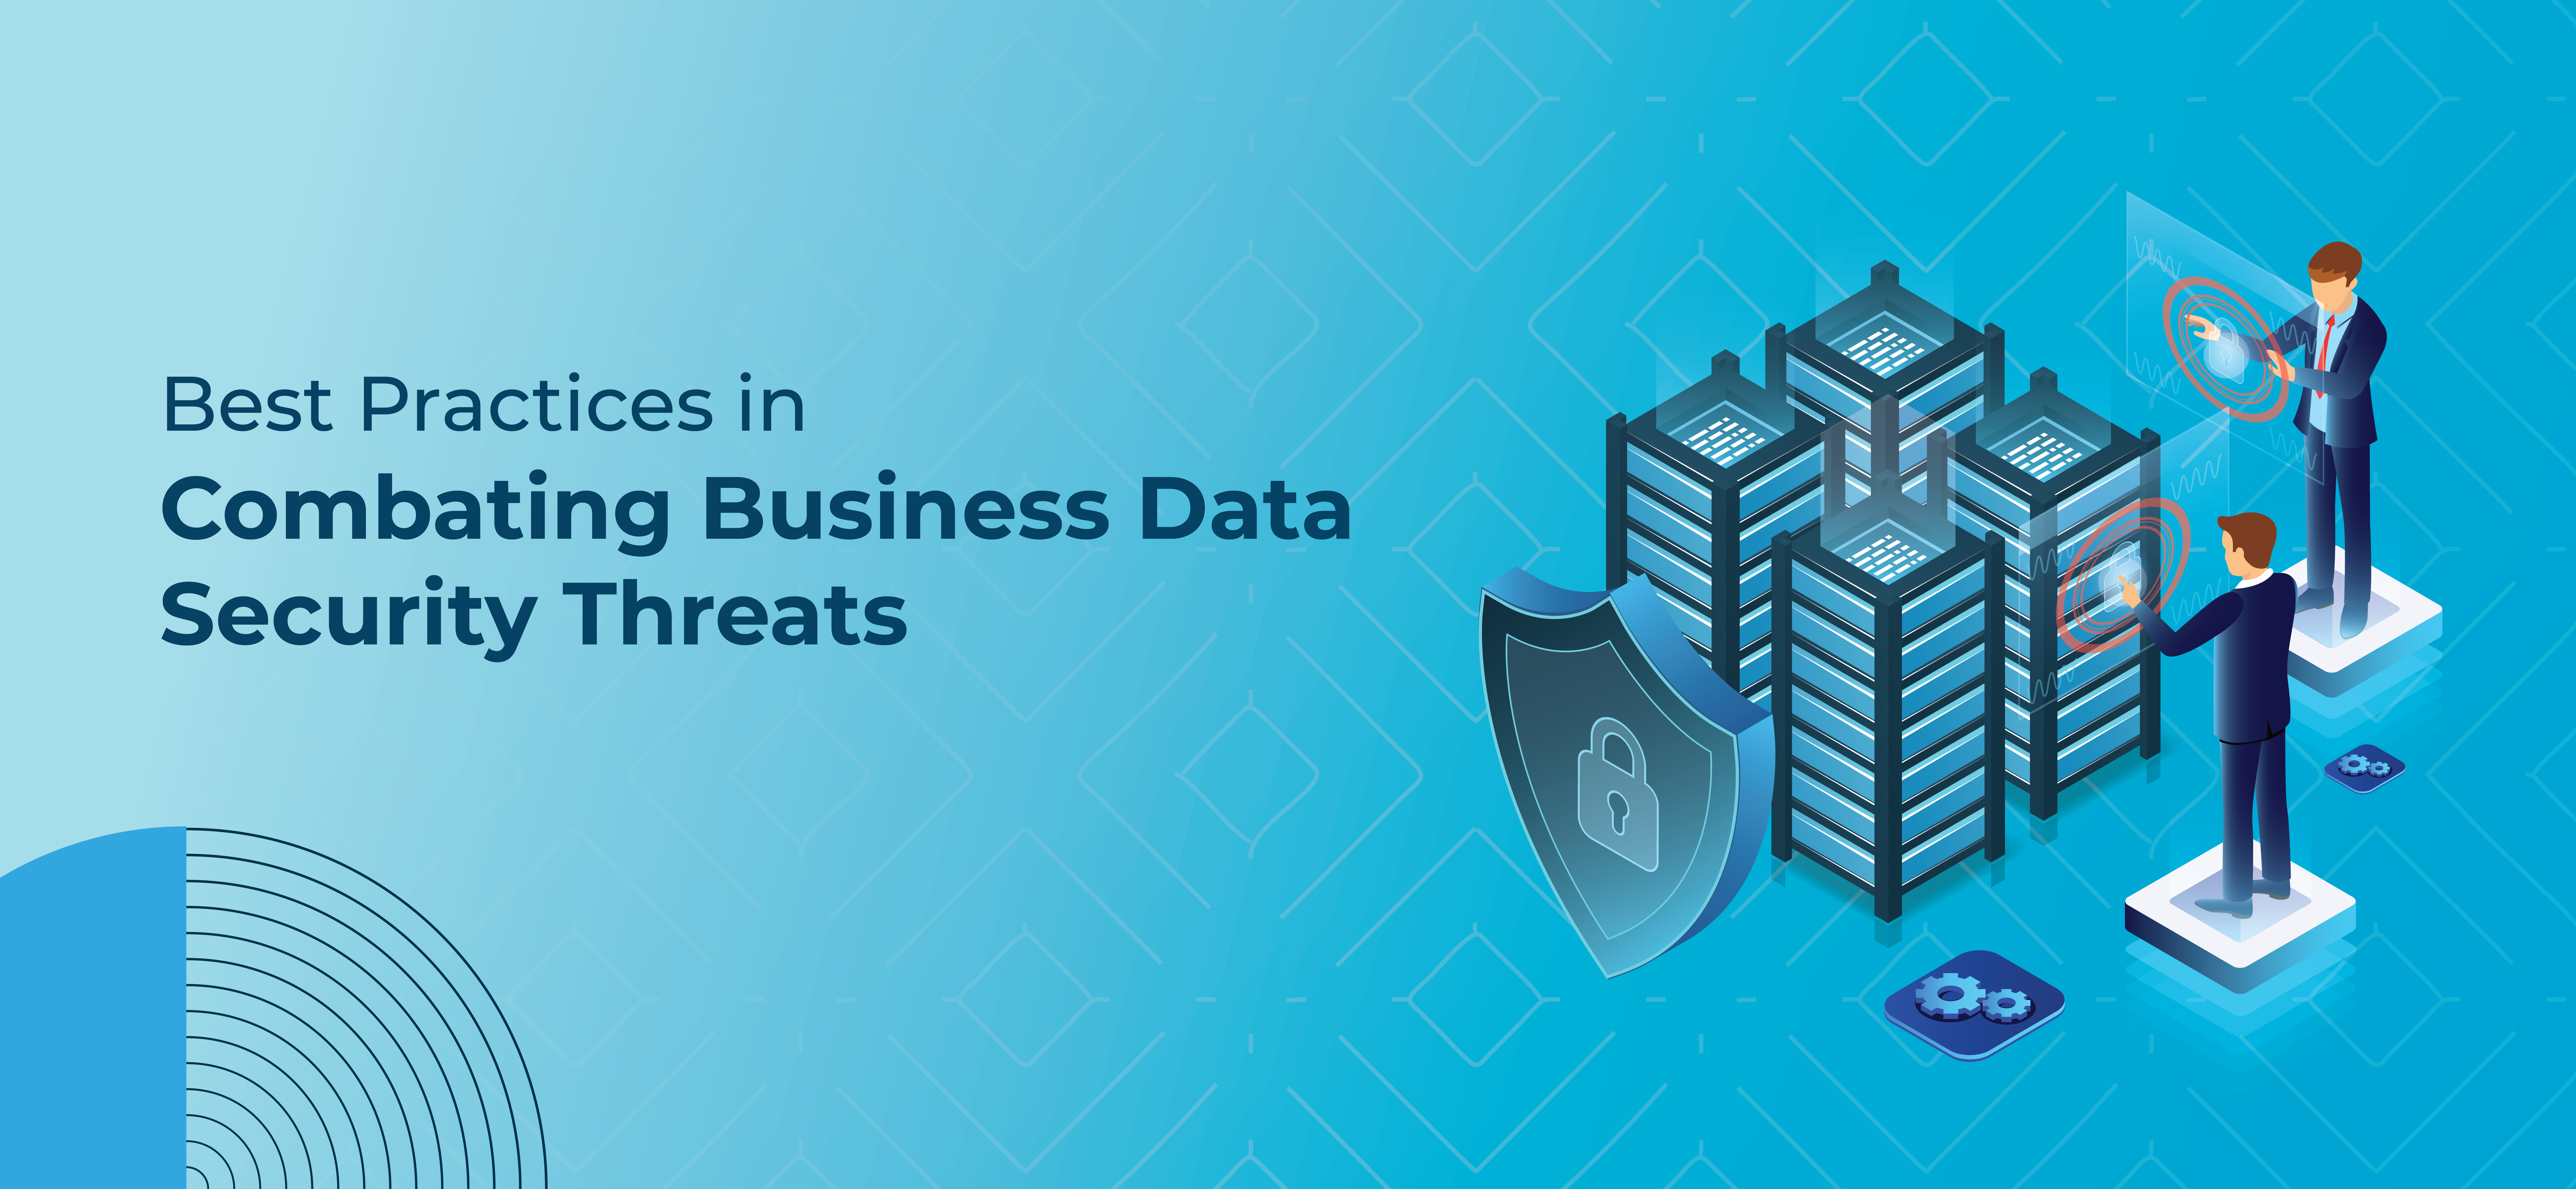 Best Practices in Combating Business Data Security Threats